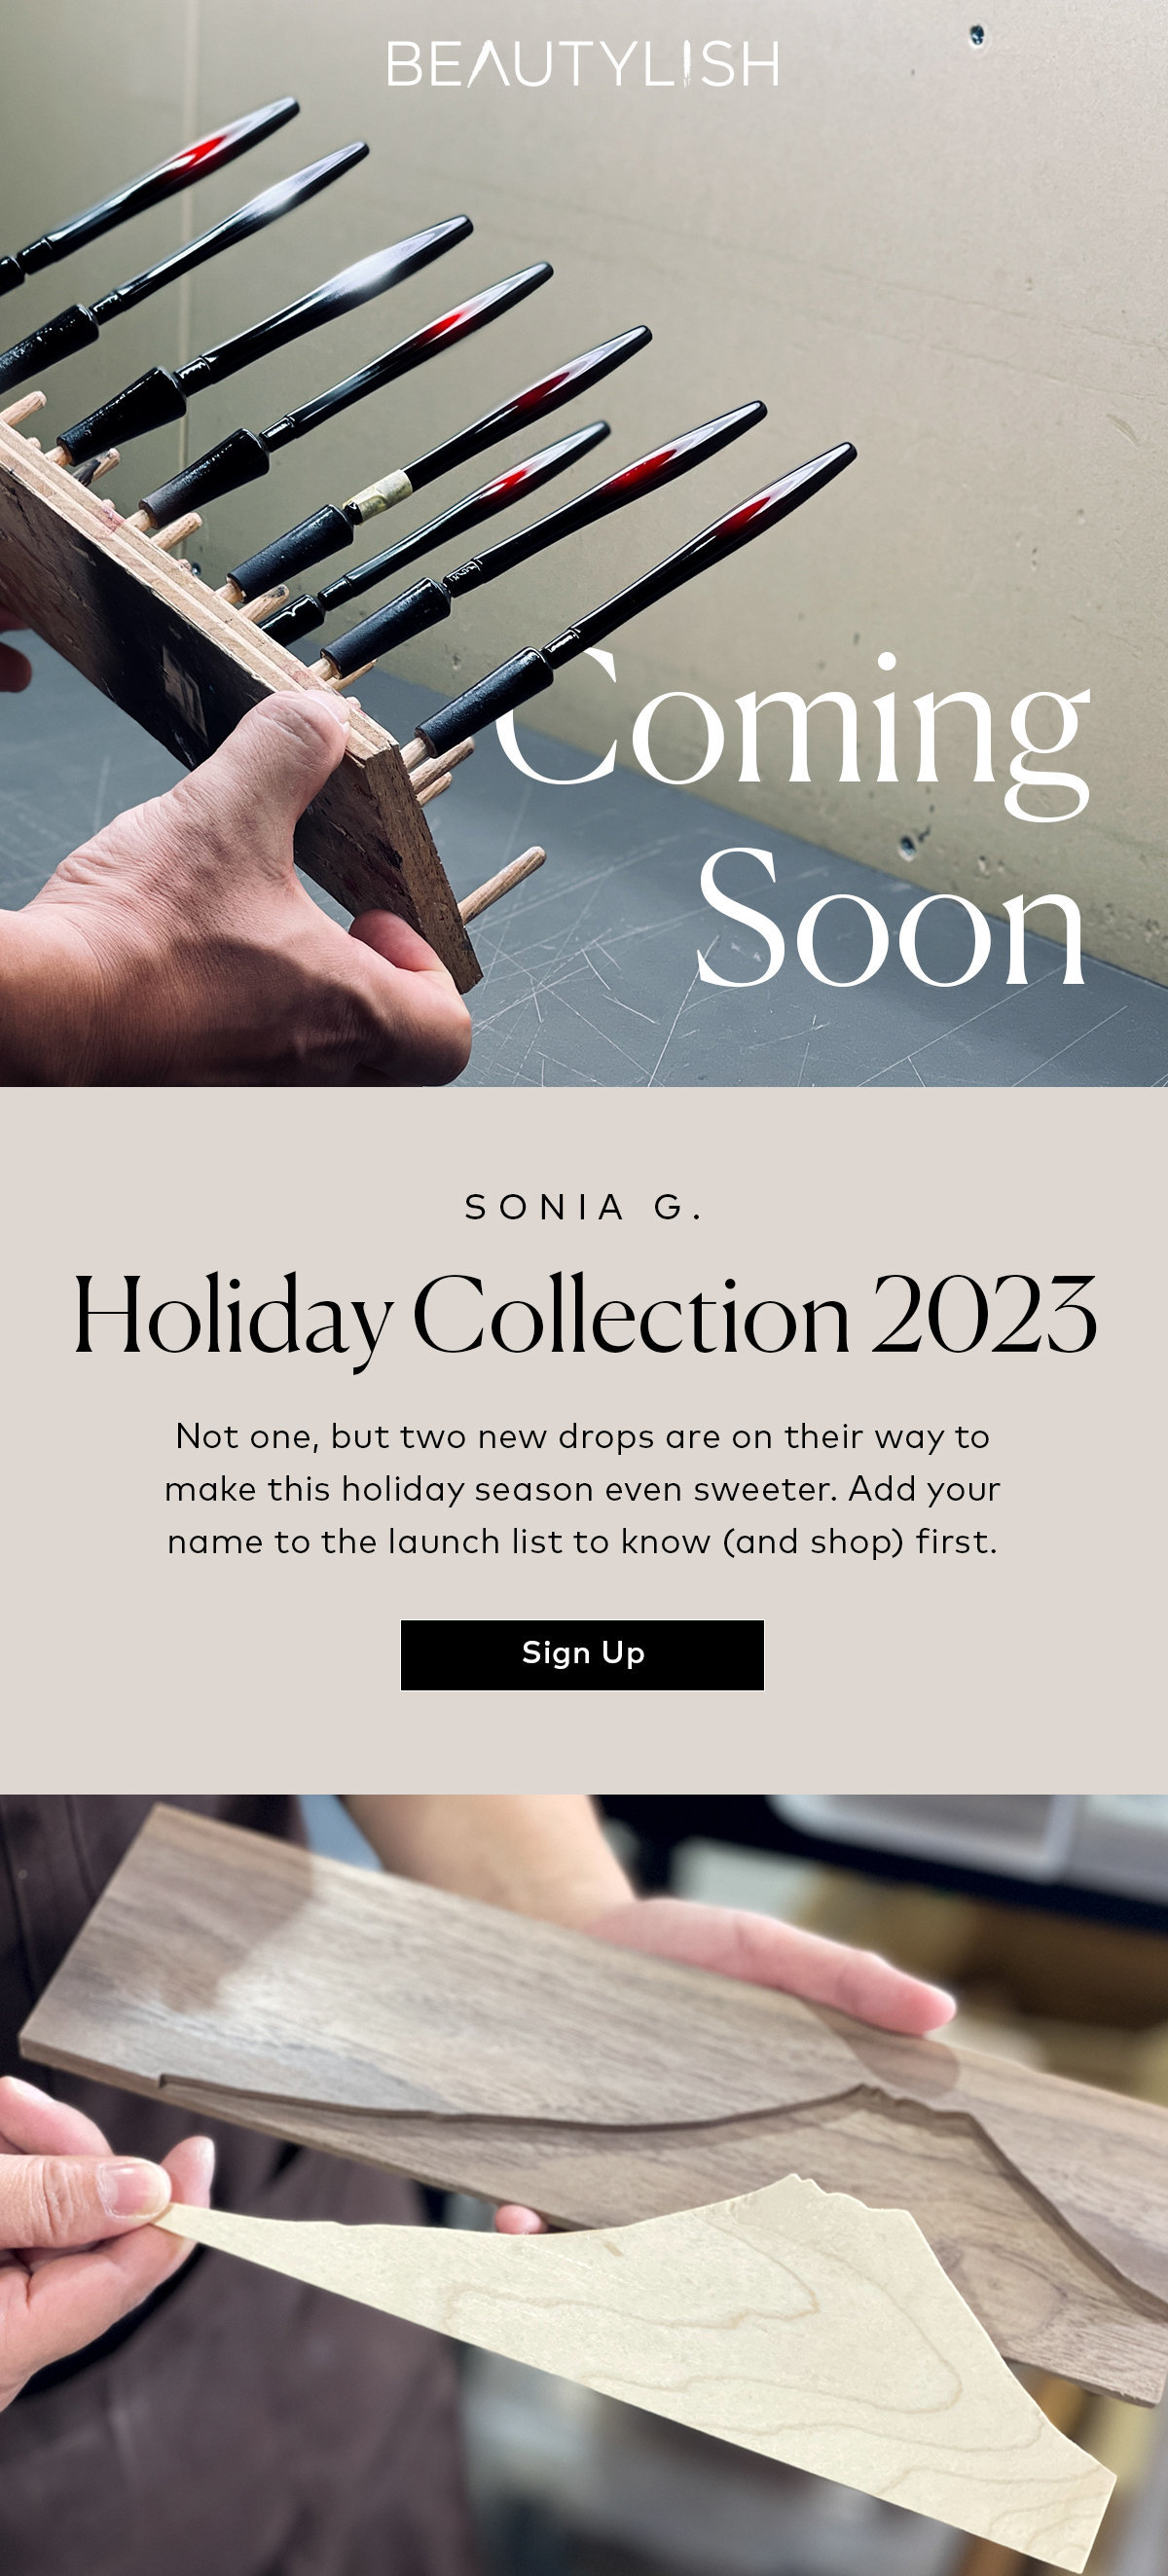 Sonia G.’s Holiday Collection is coming soon. Join the launch list here to stay updated.